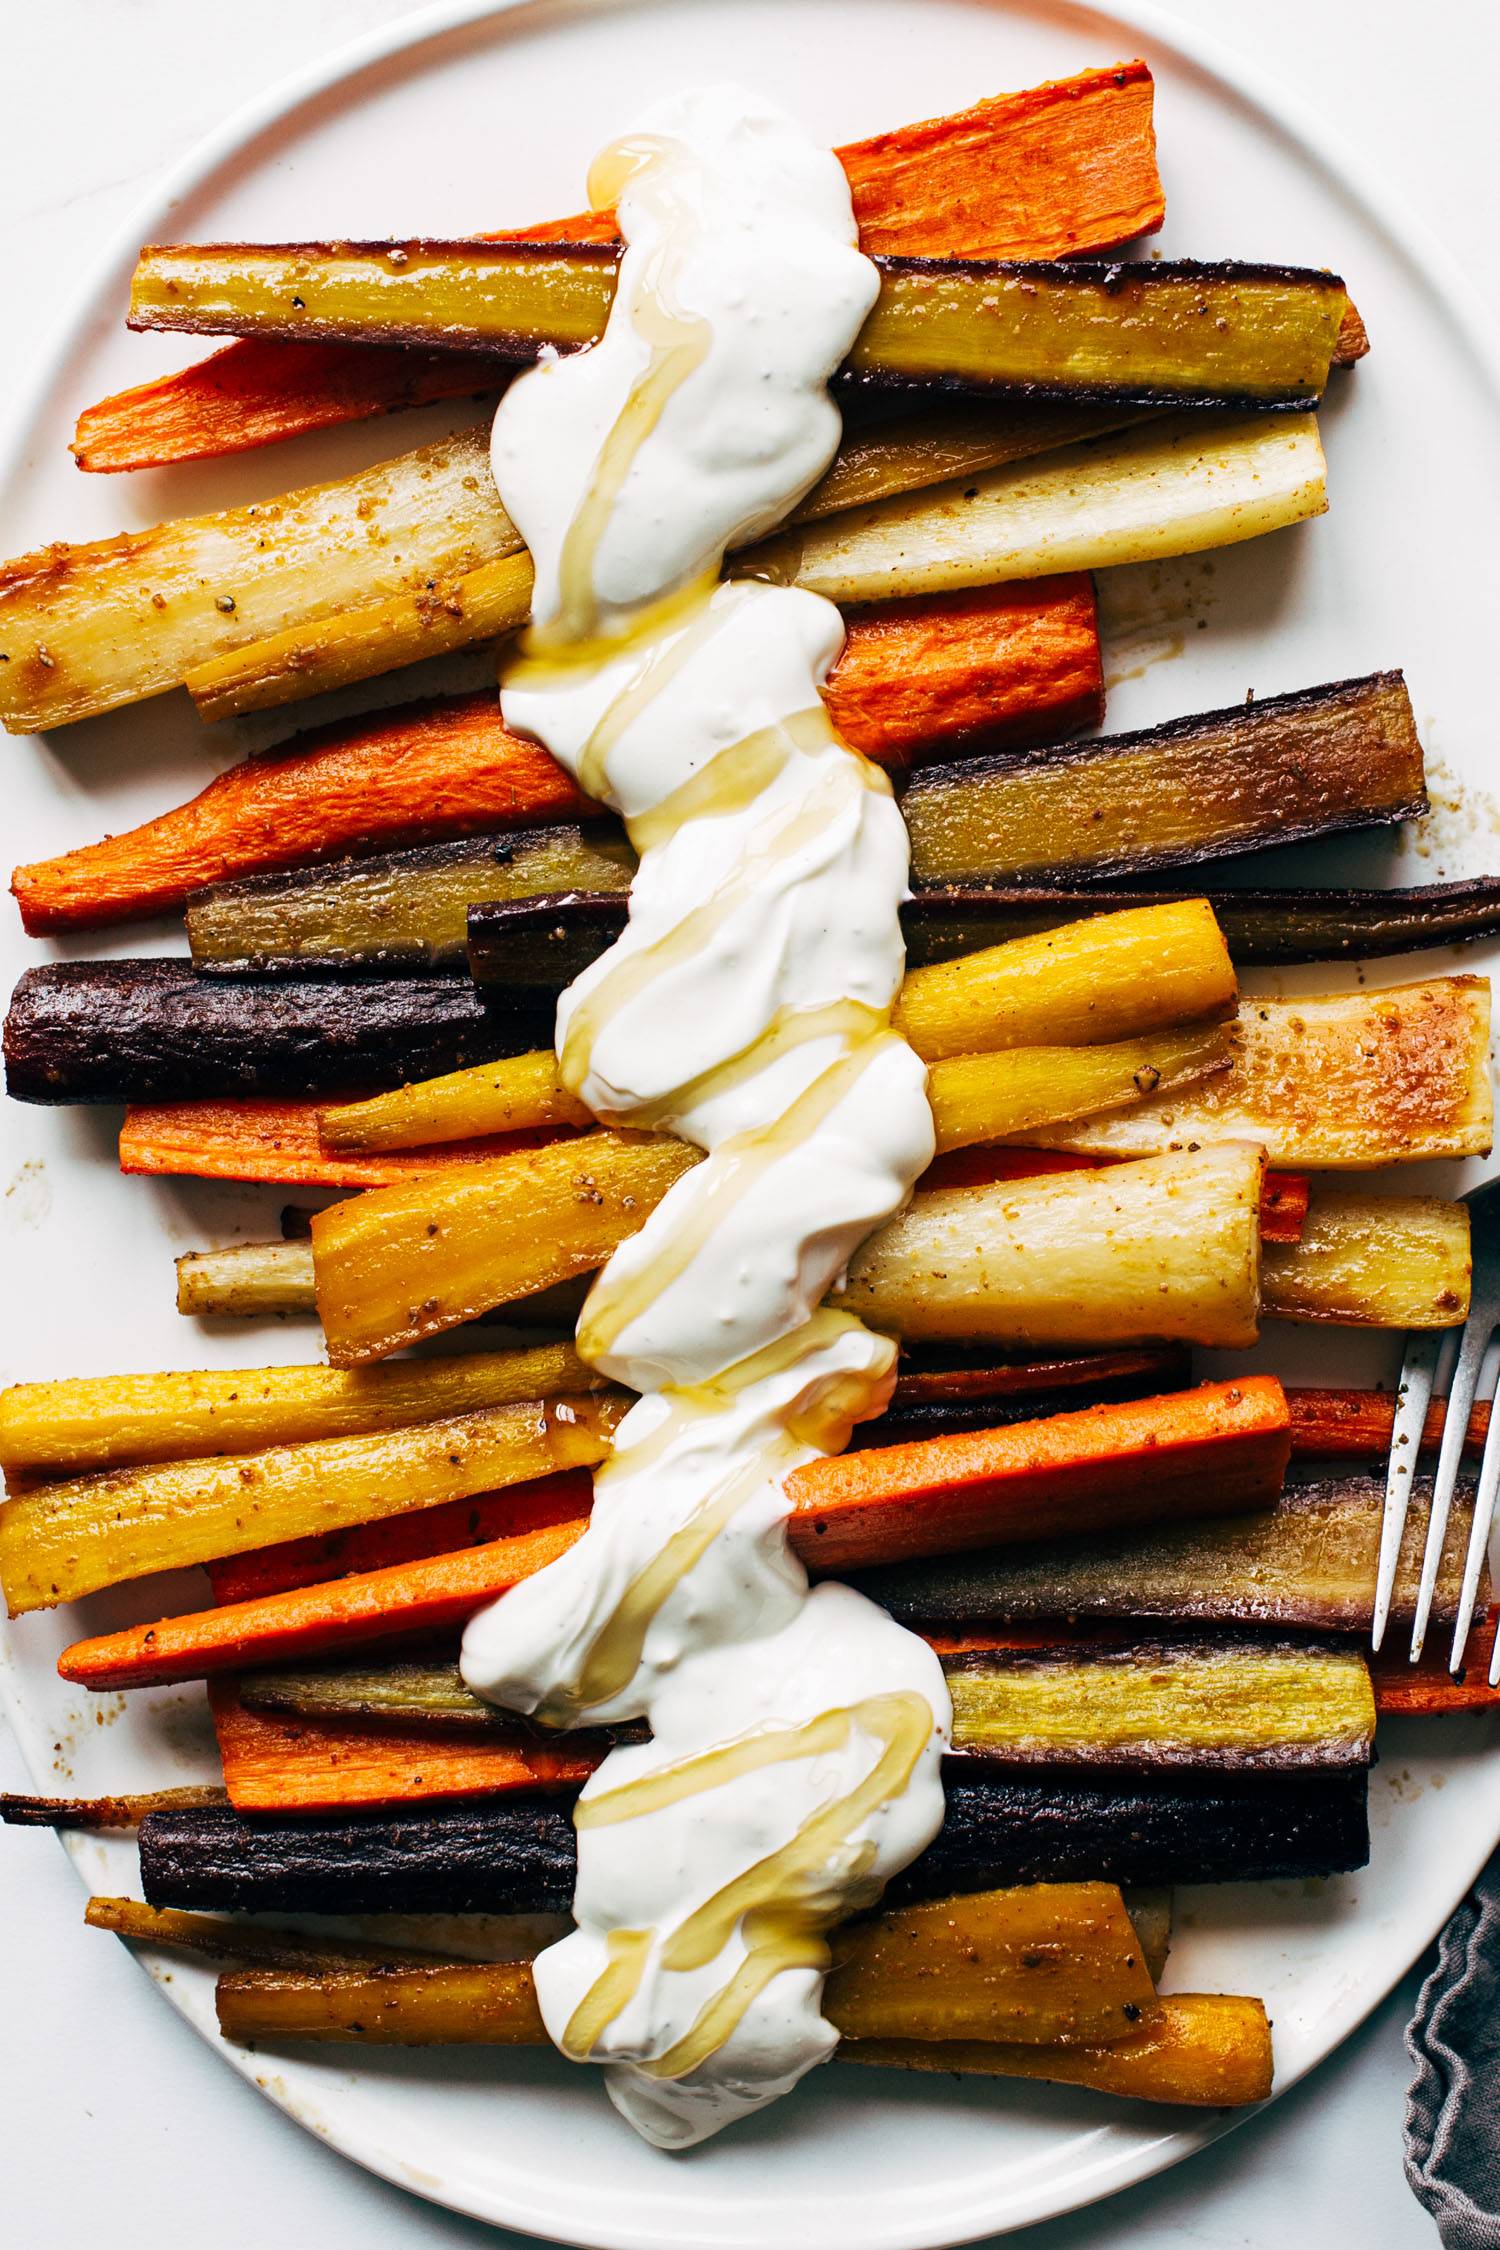 Roasted carrots on a plate with yogurt sauce and honey.